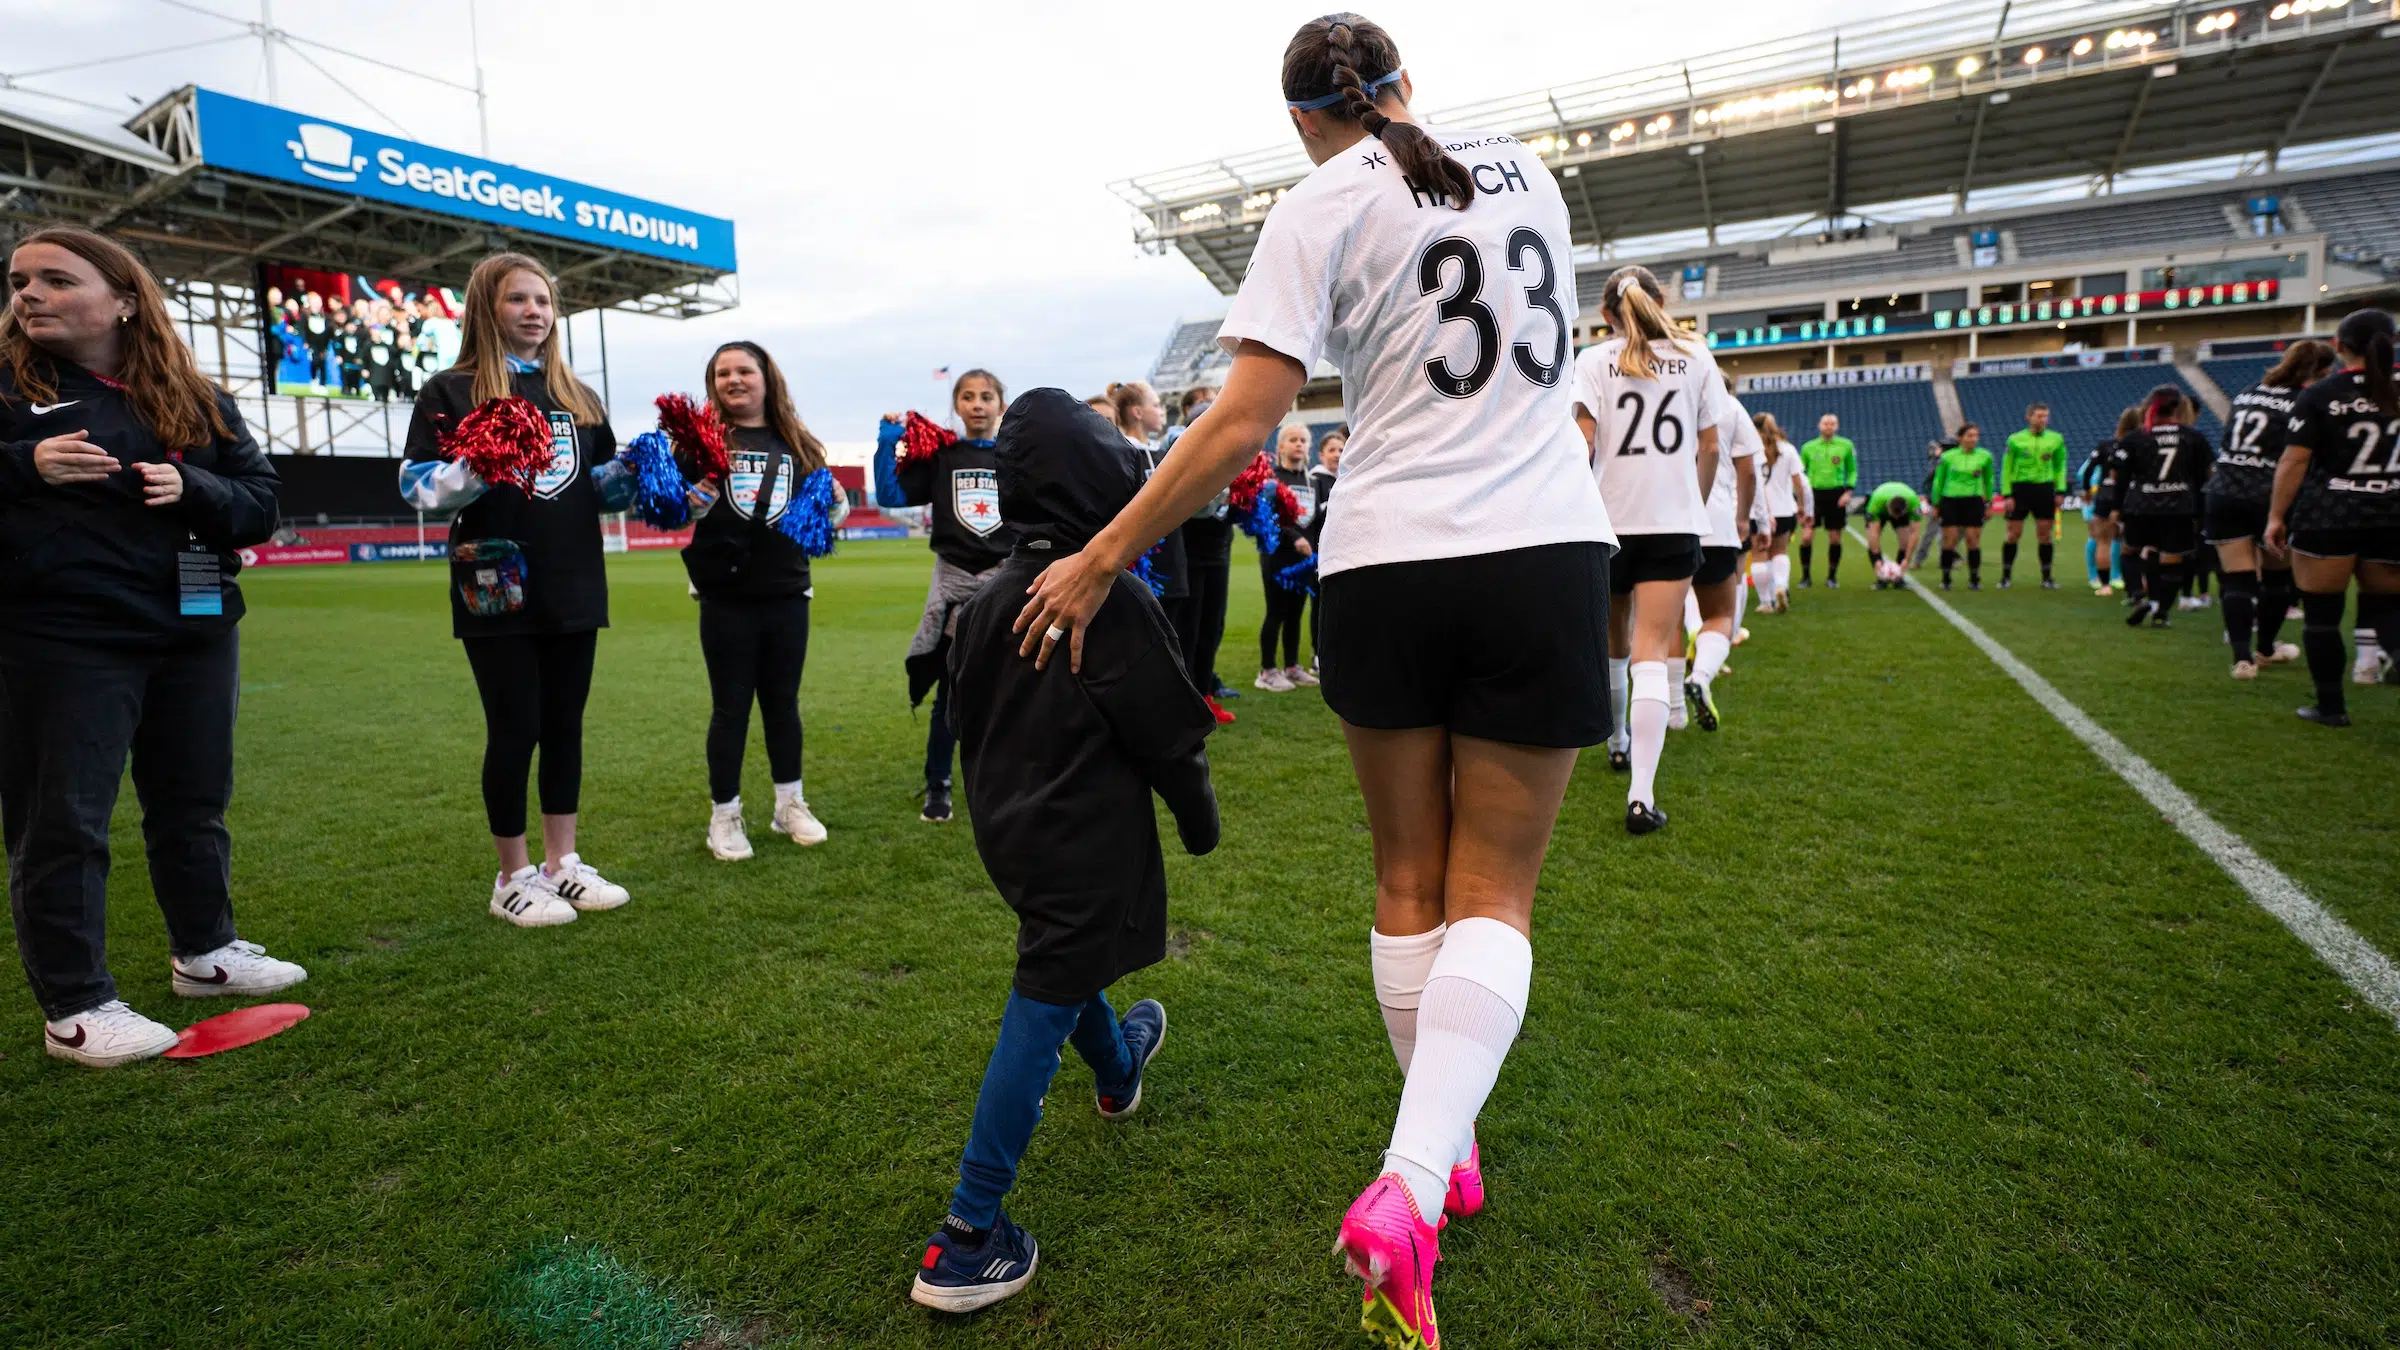 Ashley Hatch in a white top, black shorts, and white socks leads a young fan out onto the soccer field.